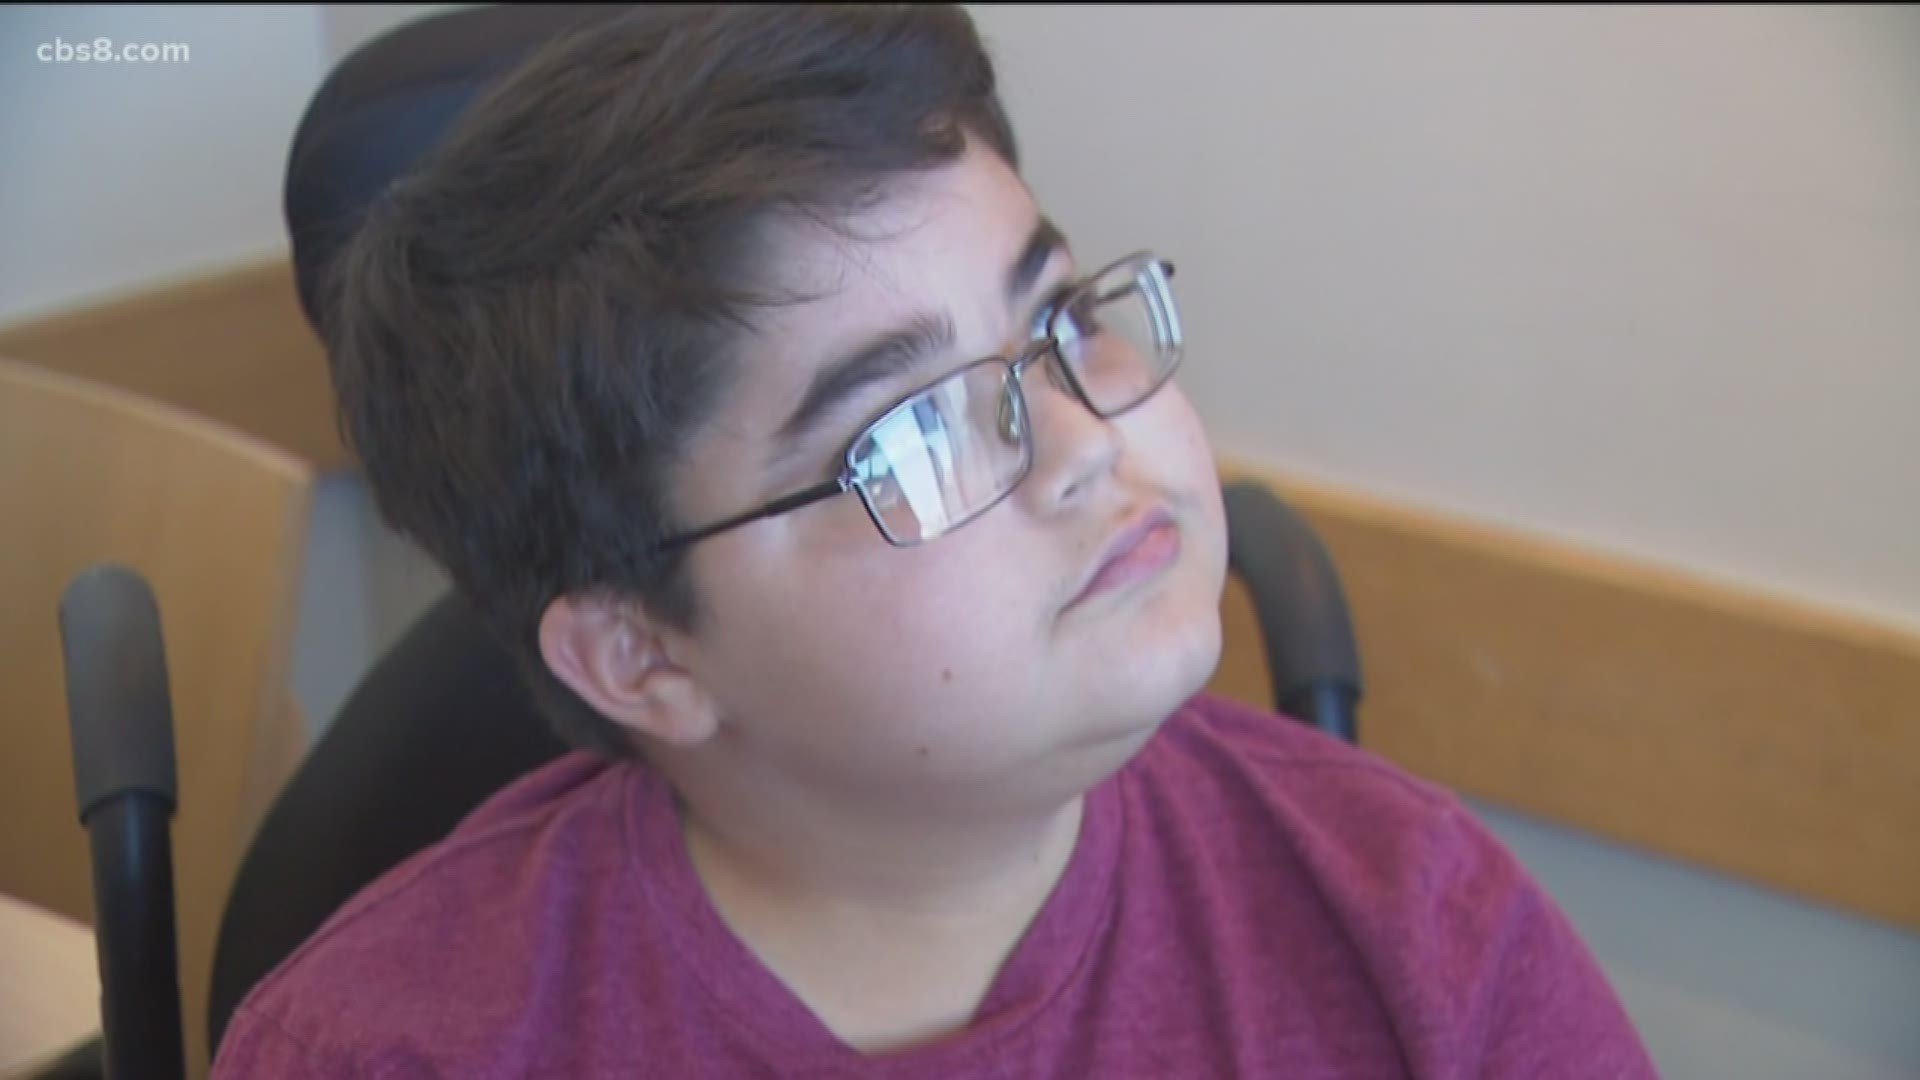 A San Diego teenager and his family was surprised with a trip of a lifetime Friday.